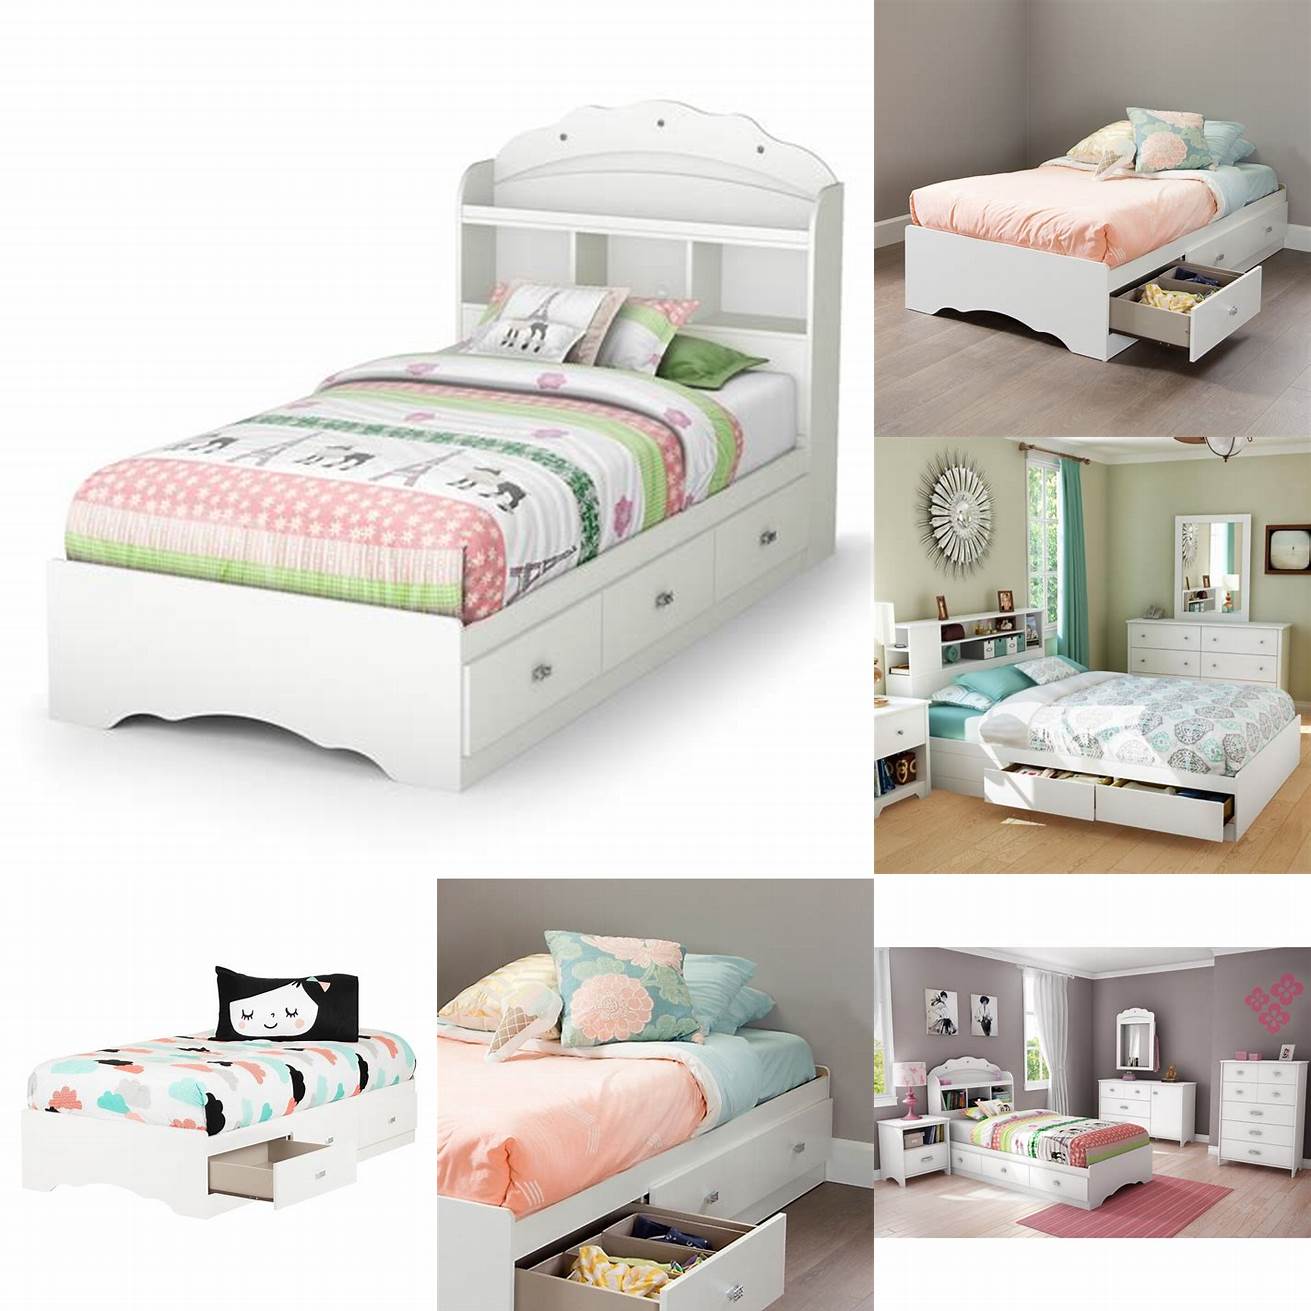 5 South Shore Tiara Mates Bed with Drawers This platform bed comes with built-in drawers and a bookshelf